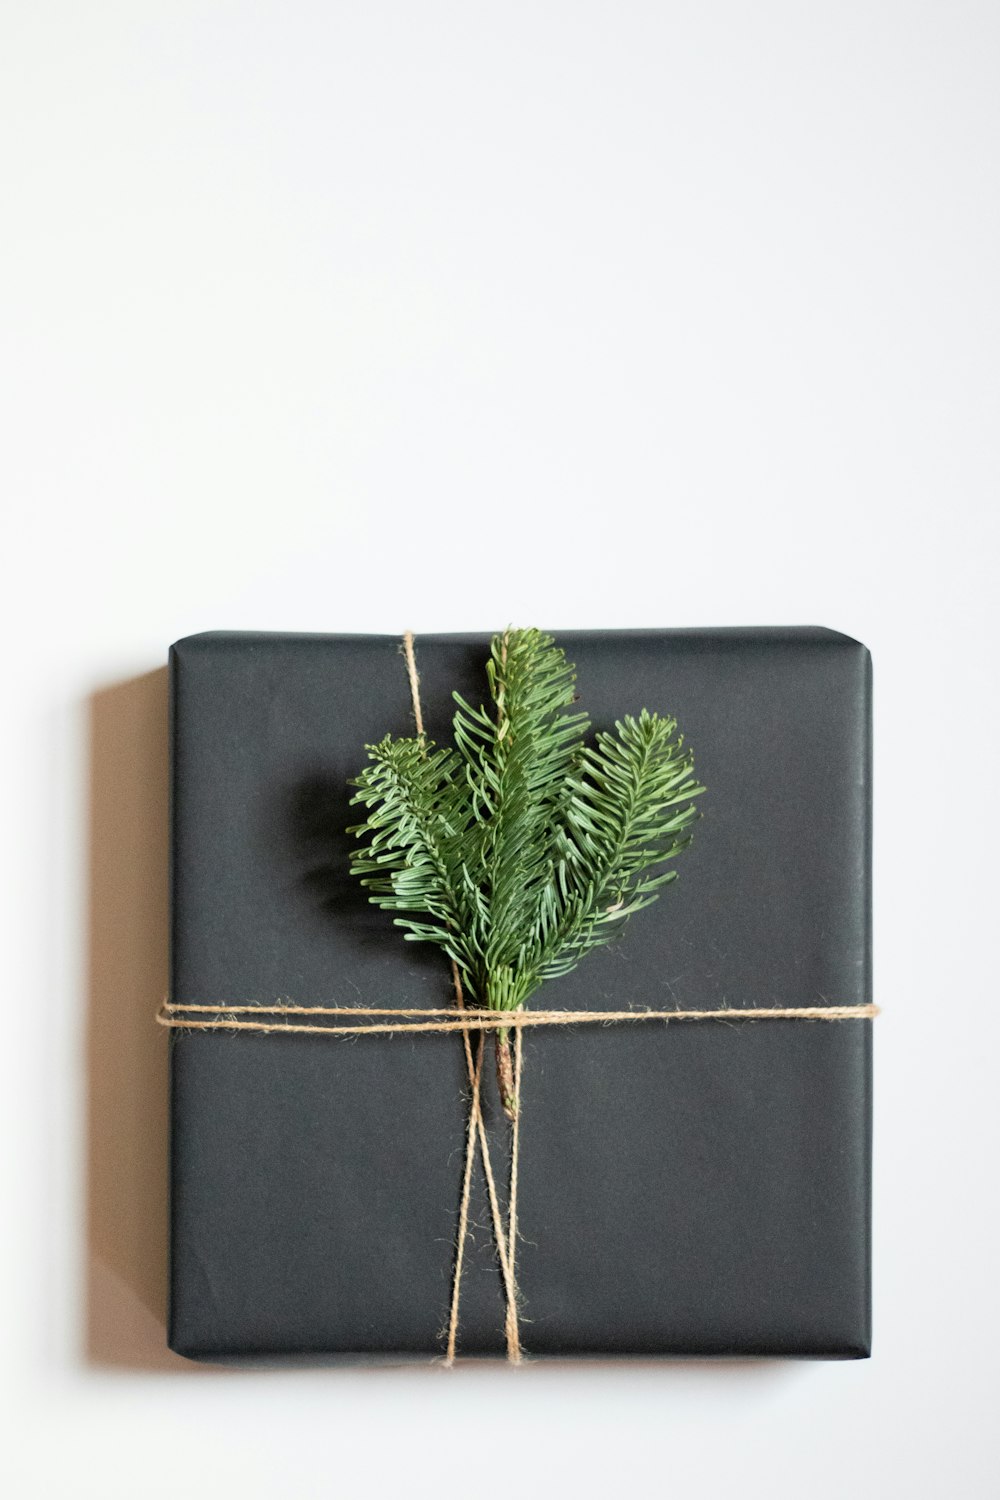 a present wrapped in black paper and tied with twine